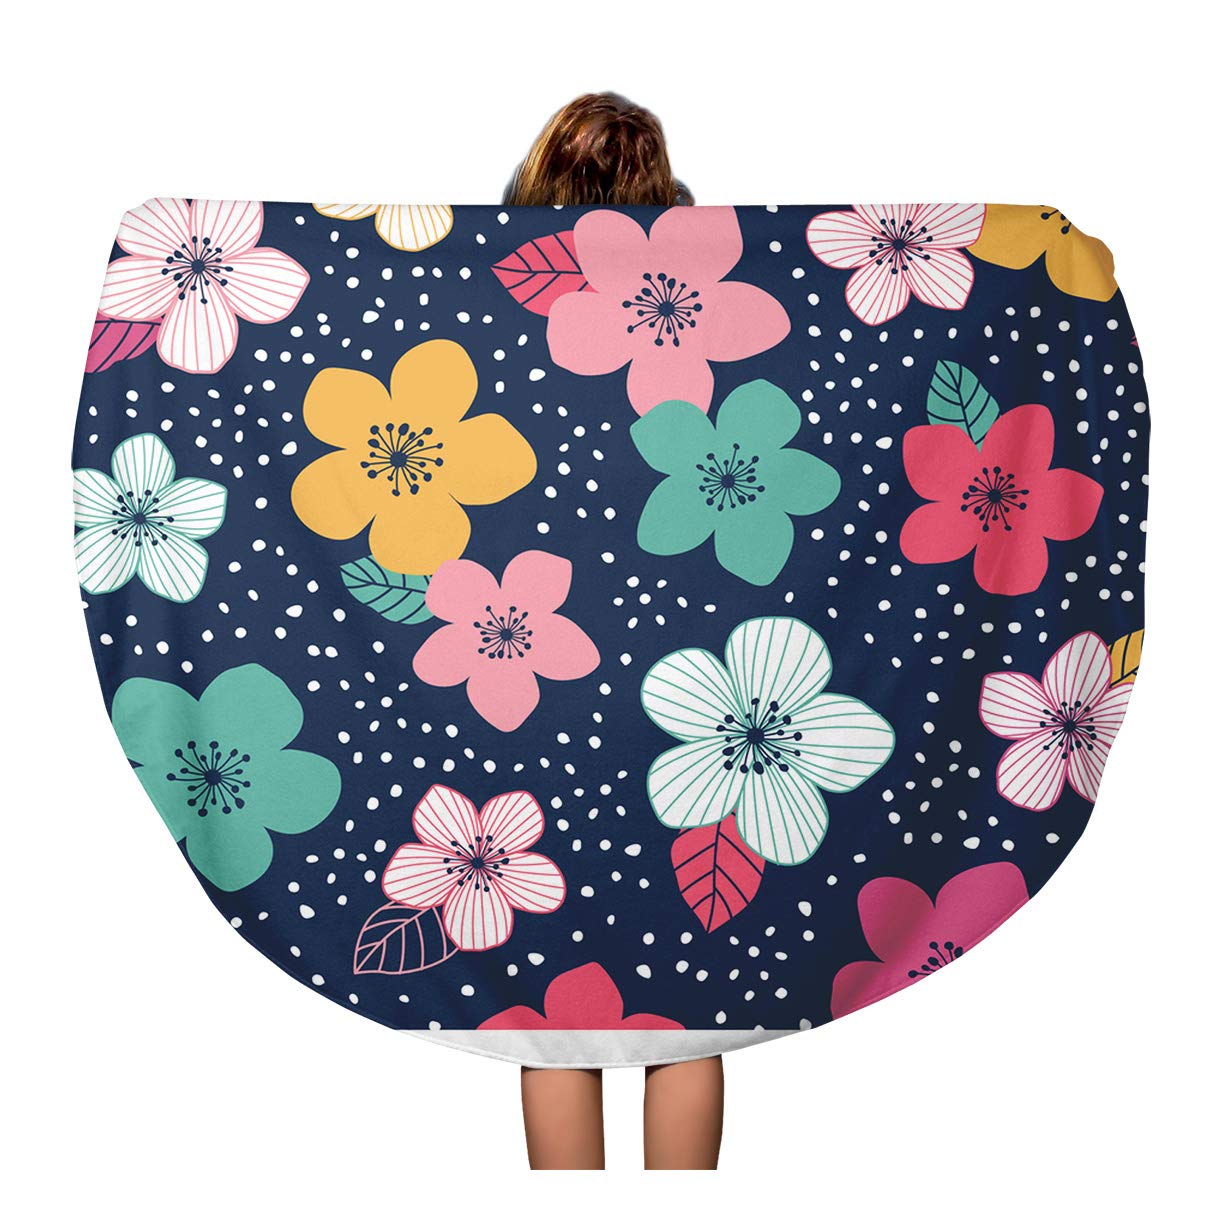 KDAGR 60 inch Round Beach Towel Blanket Flower Colorful Floral Pattern Dot Simple Summer Cute Pretty Travel Circle Circular Towels Mat Tapestry Beach Throw - image 1 of 2